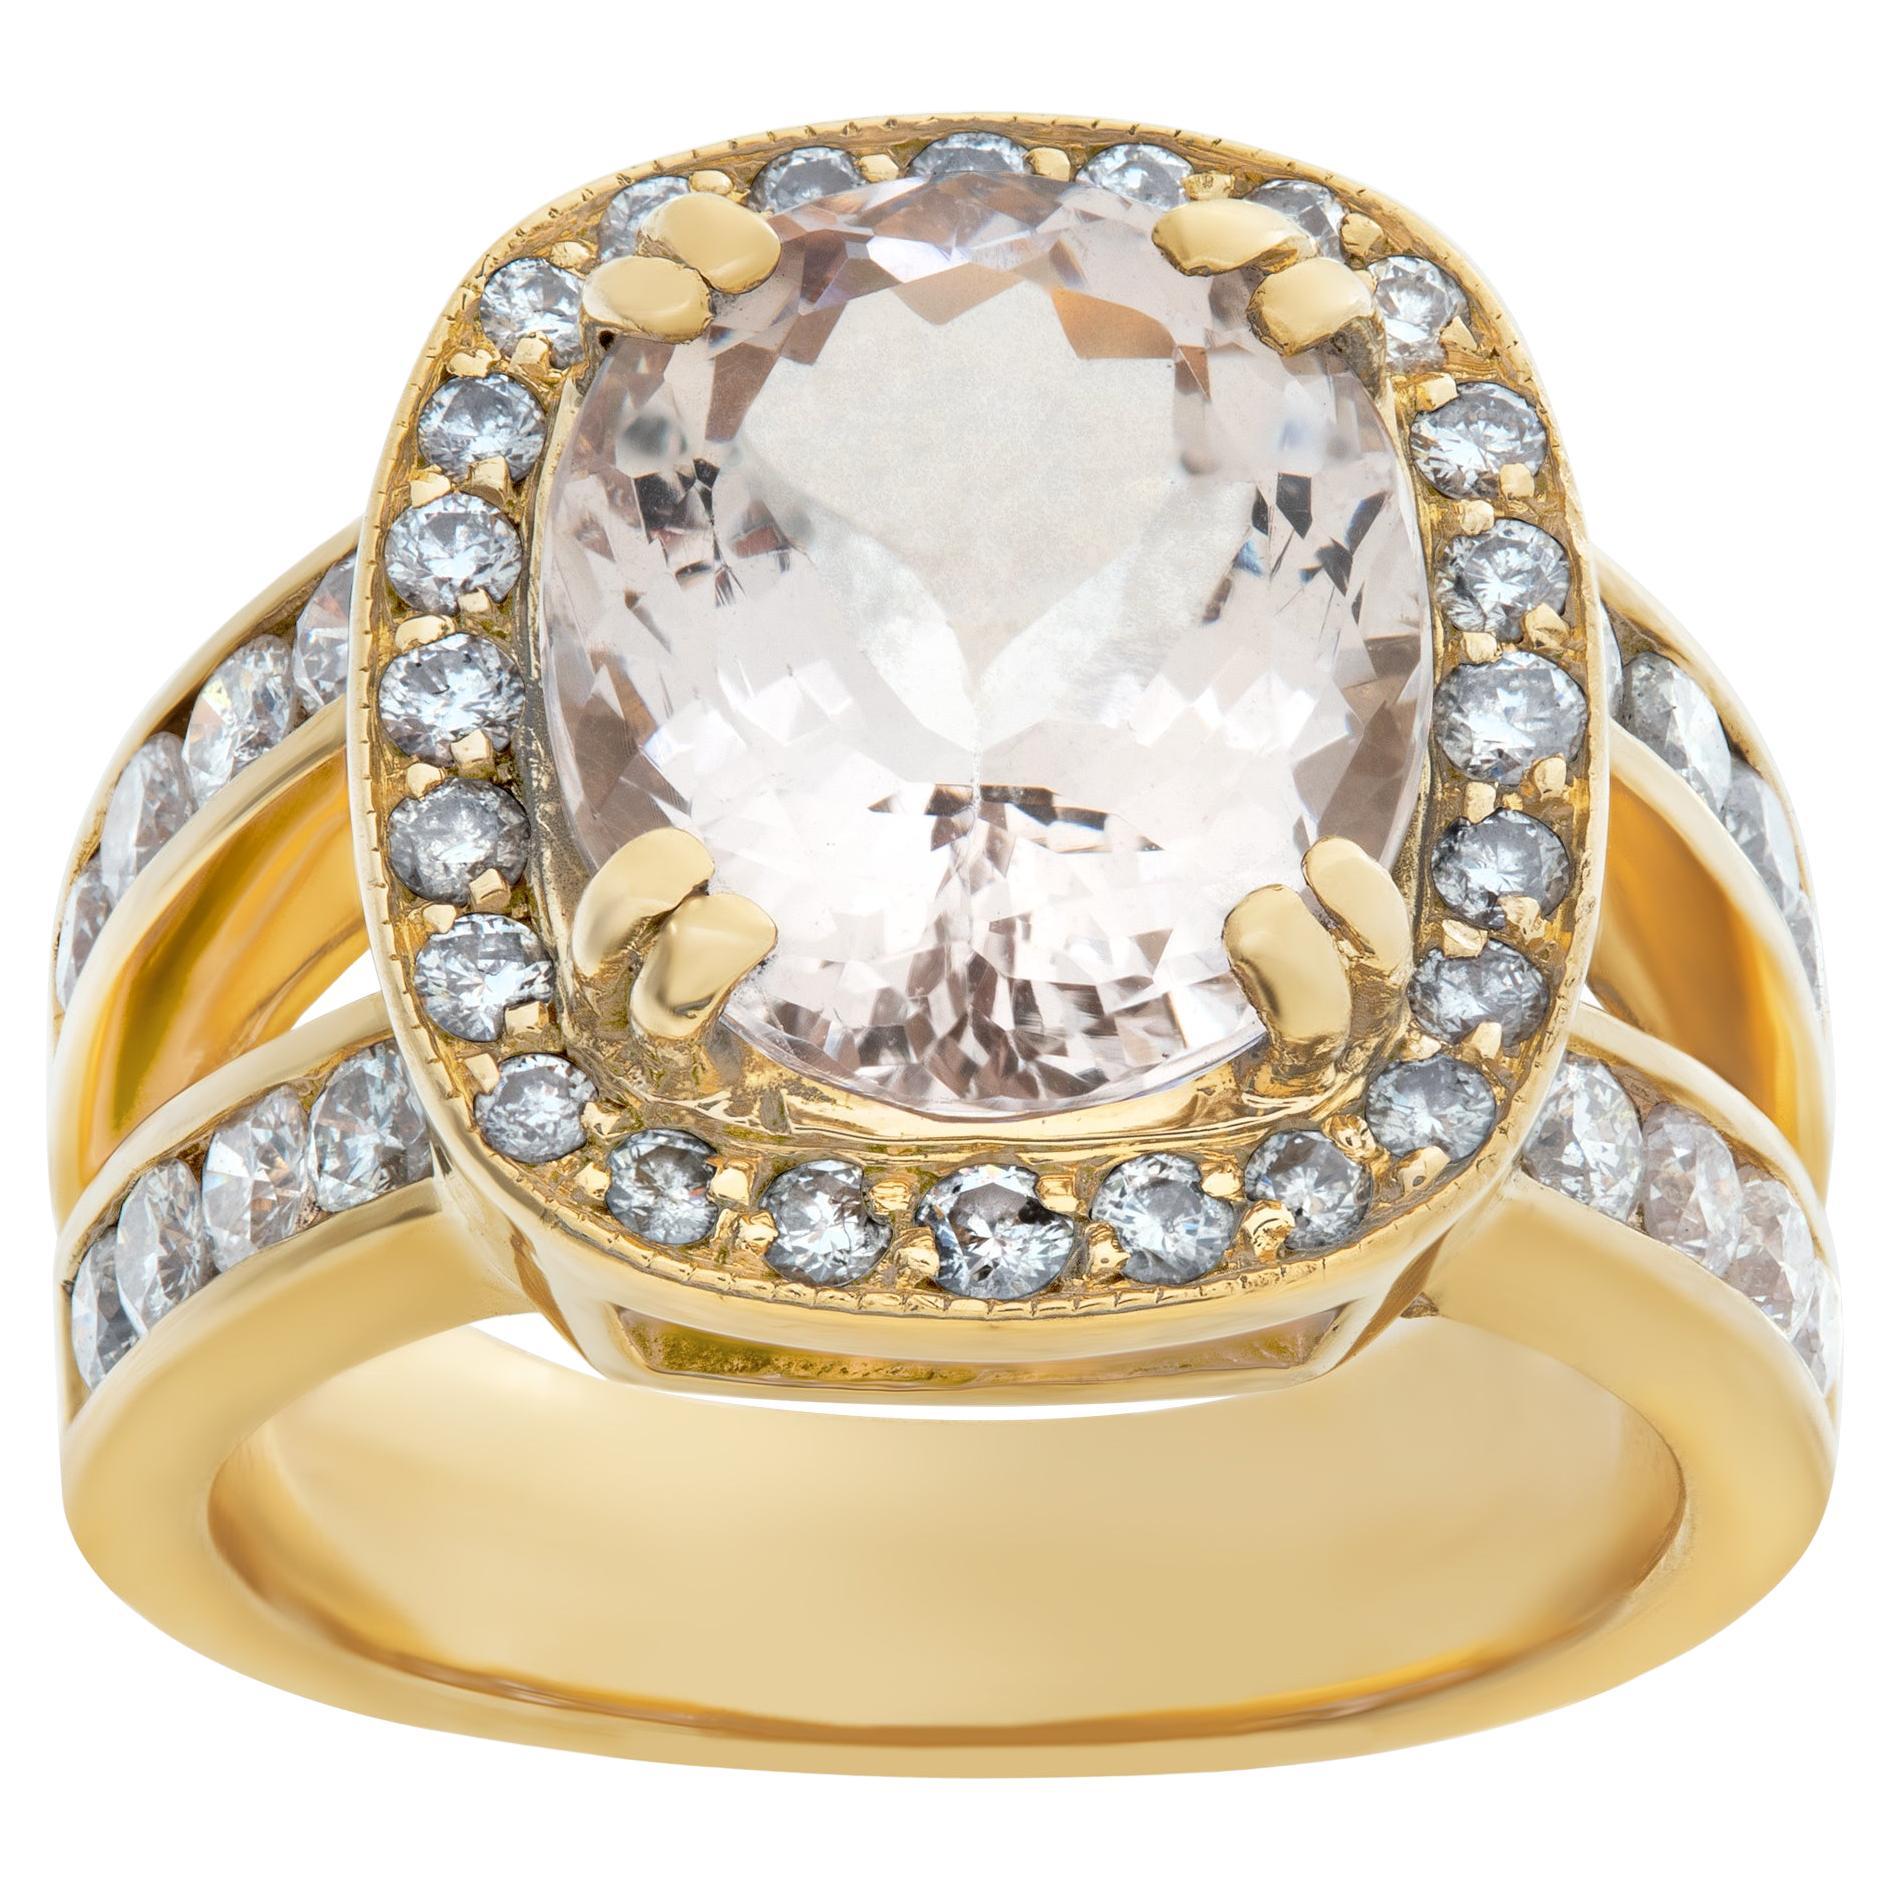 18k Yellow Gold Ring with Cushion Cut Morganite Stone, 'Over 5.30 Carats' For Sale